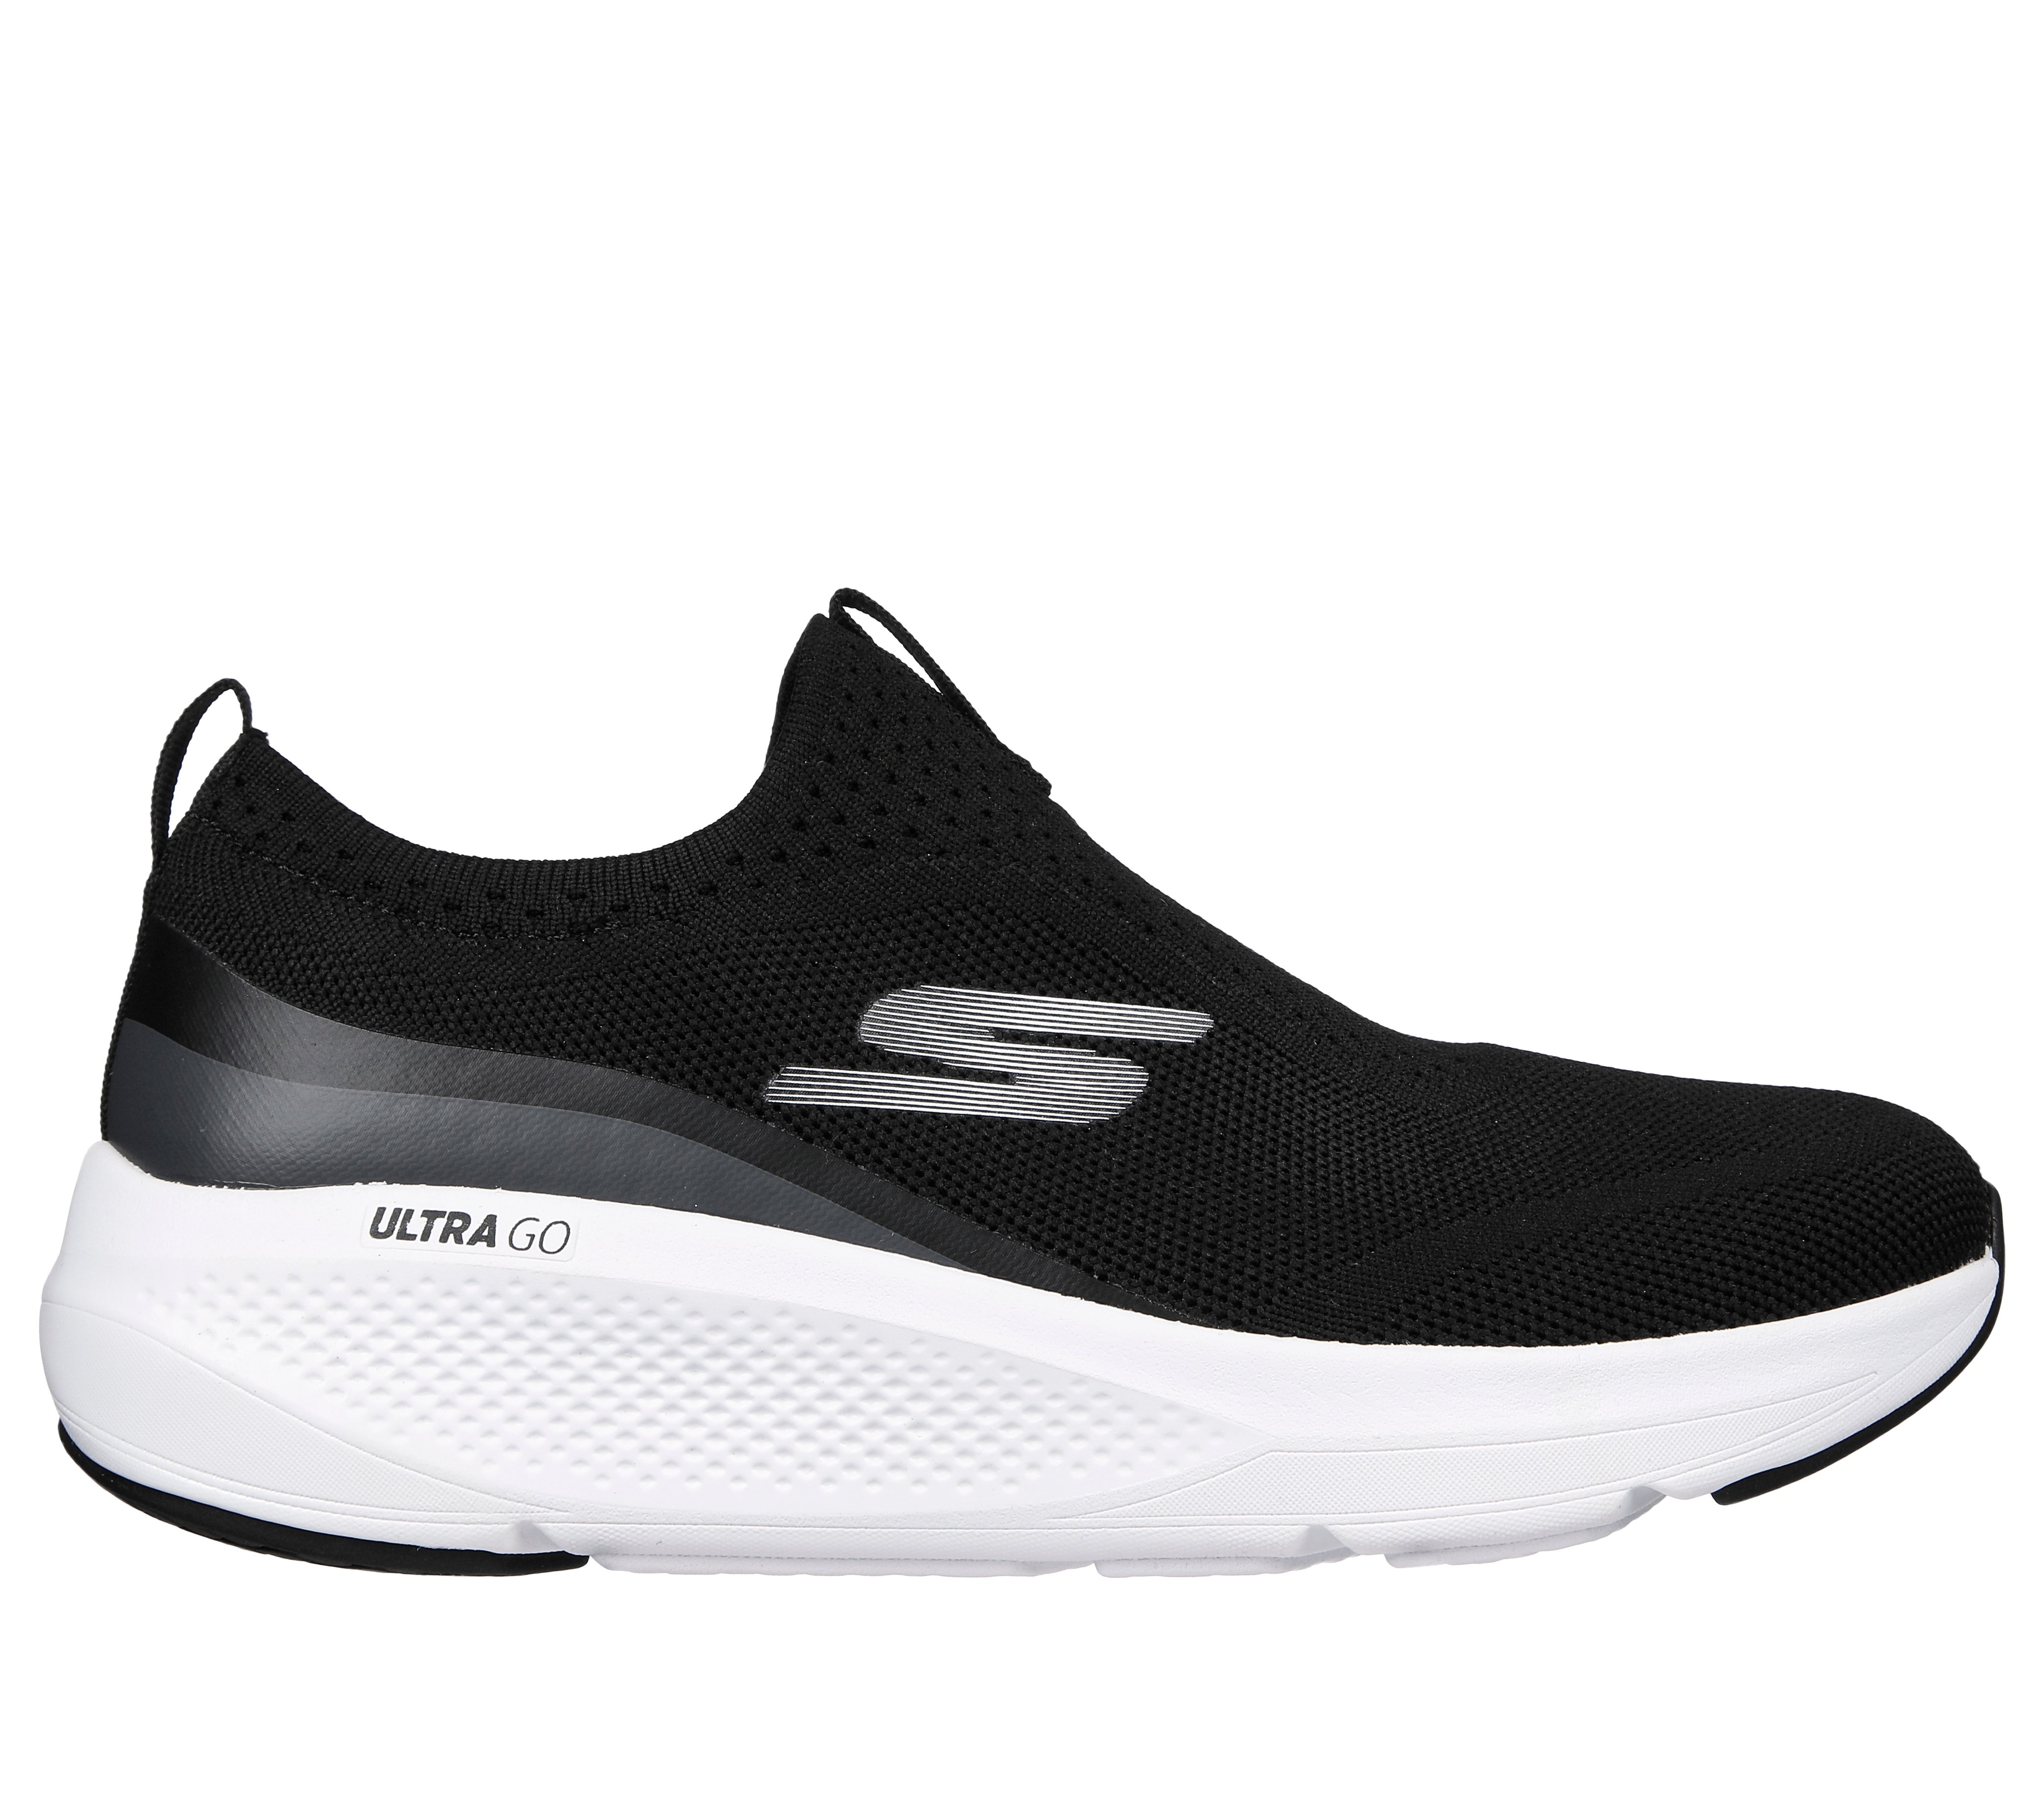 Skechers Greece on X: Elevate your outfit with white D'lites